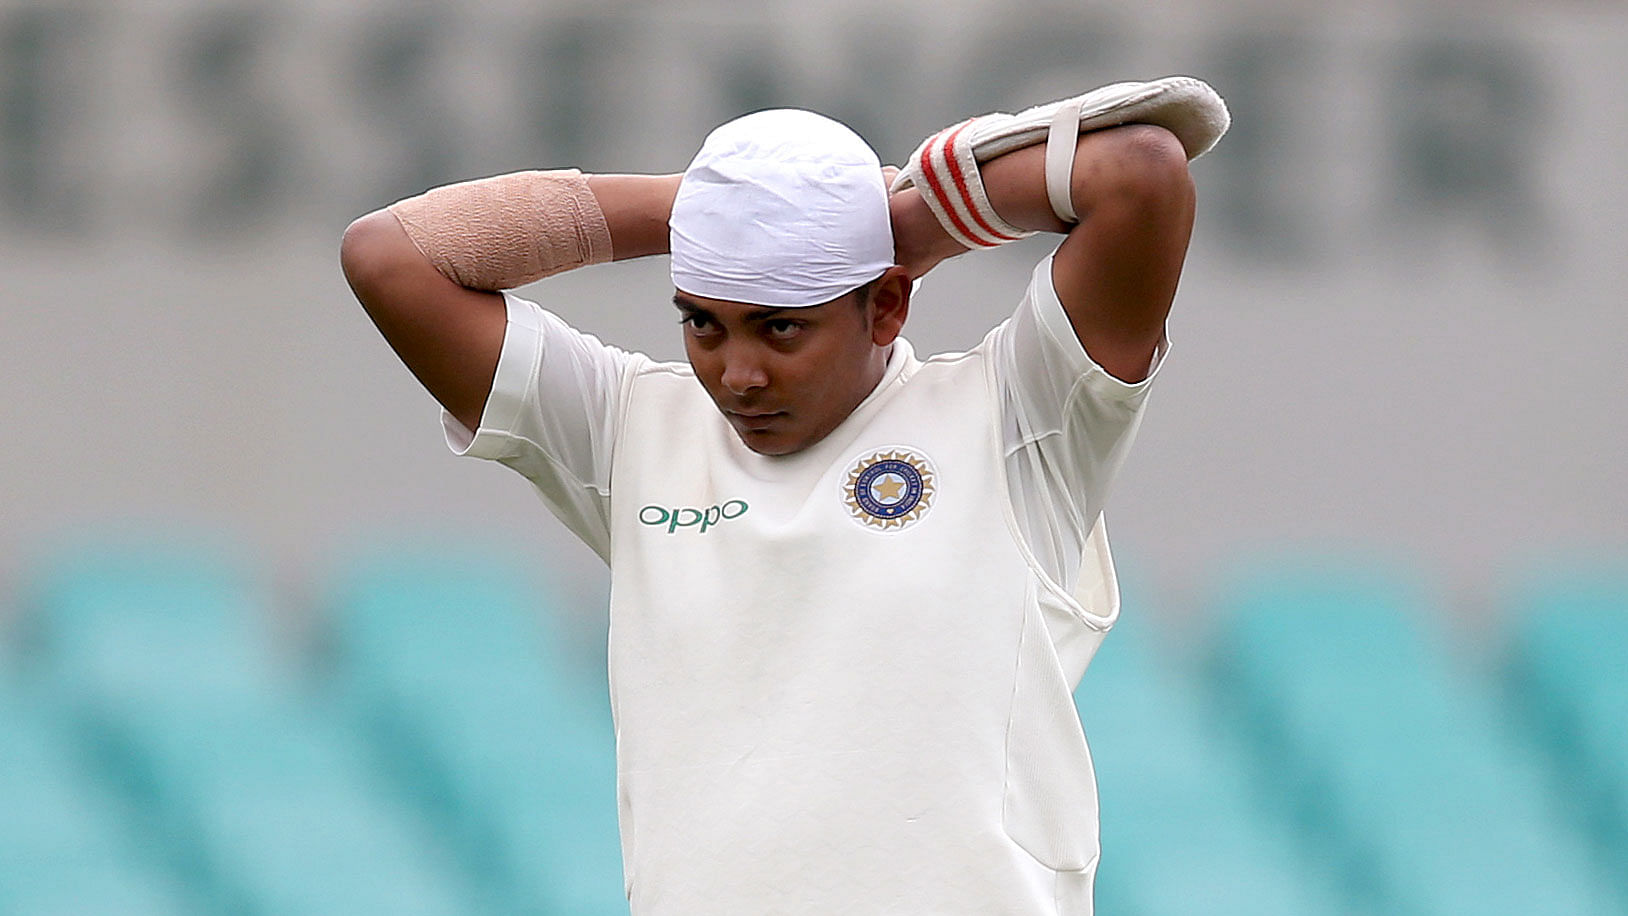 According to the BCCI statement, Prithvi&nbsp; Shaw is currently under rehab at the National Cricket Academy (NCA) in Bengaluru.